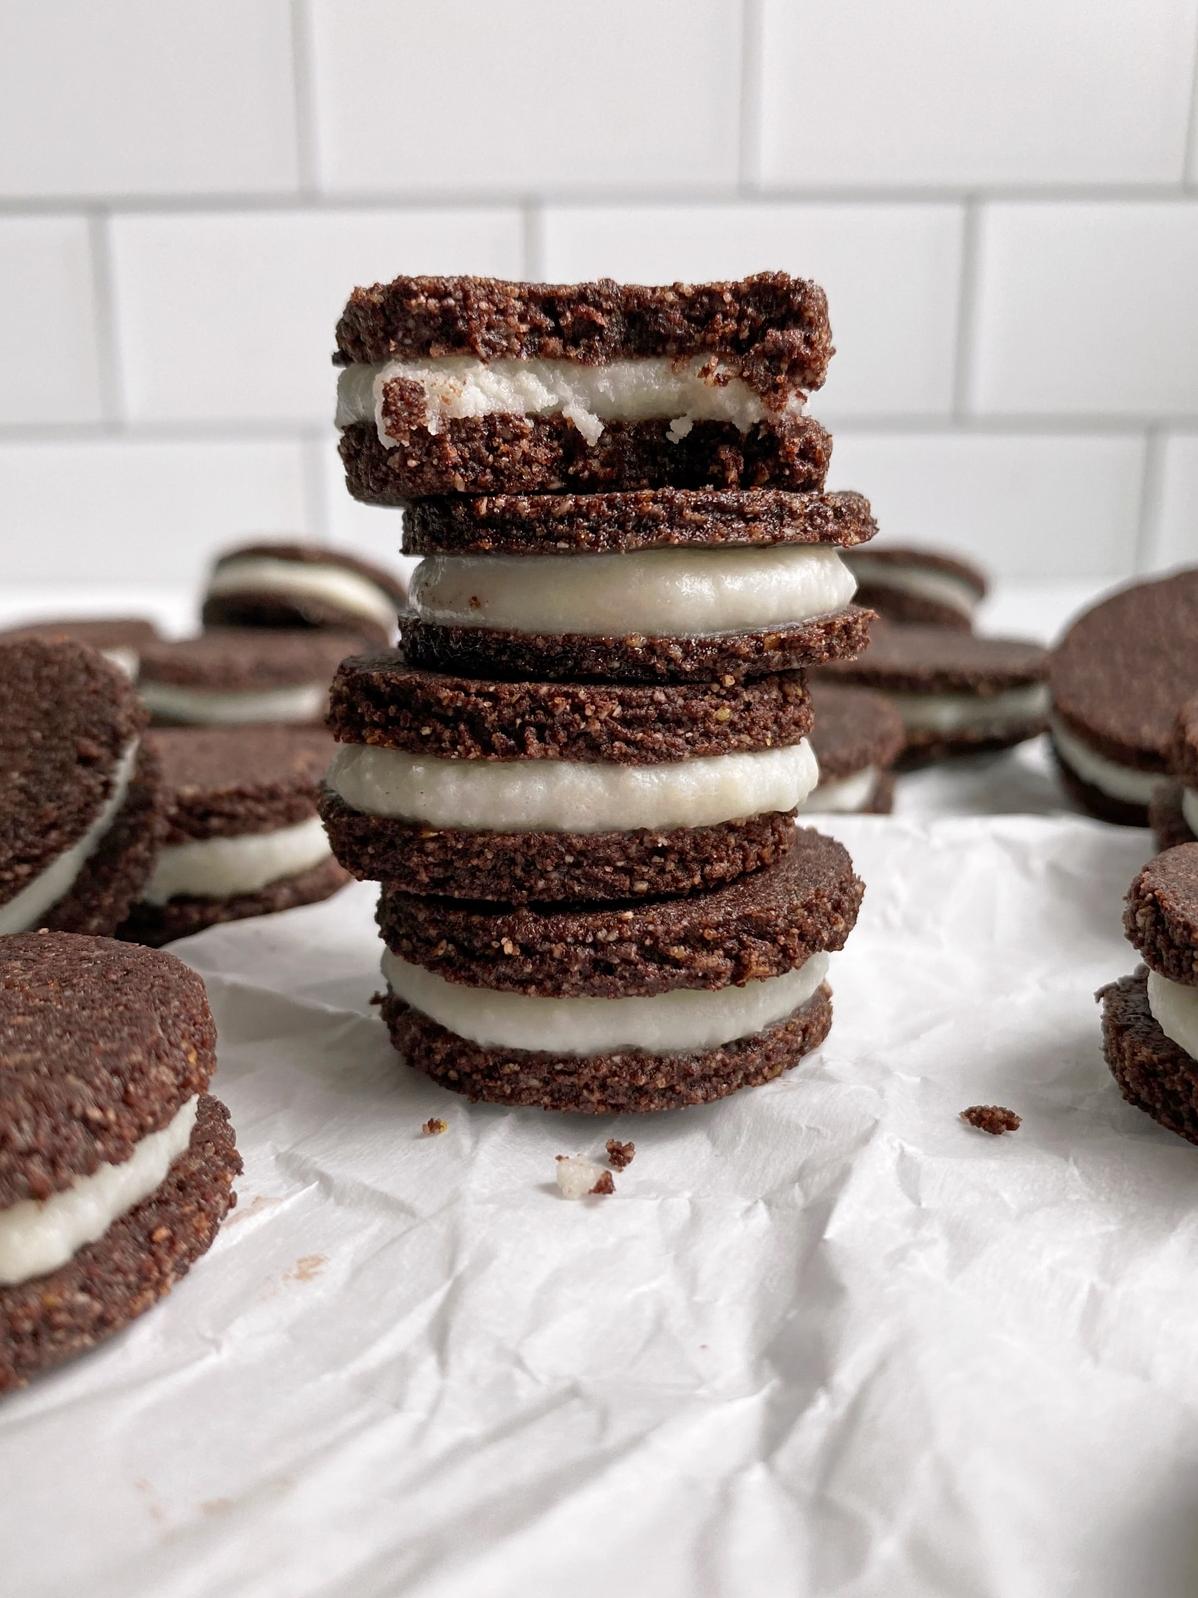  Dark chocolate sandwich cookies are the ultimate indulgence for those looking for gluten-free desserts.